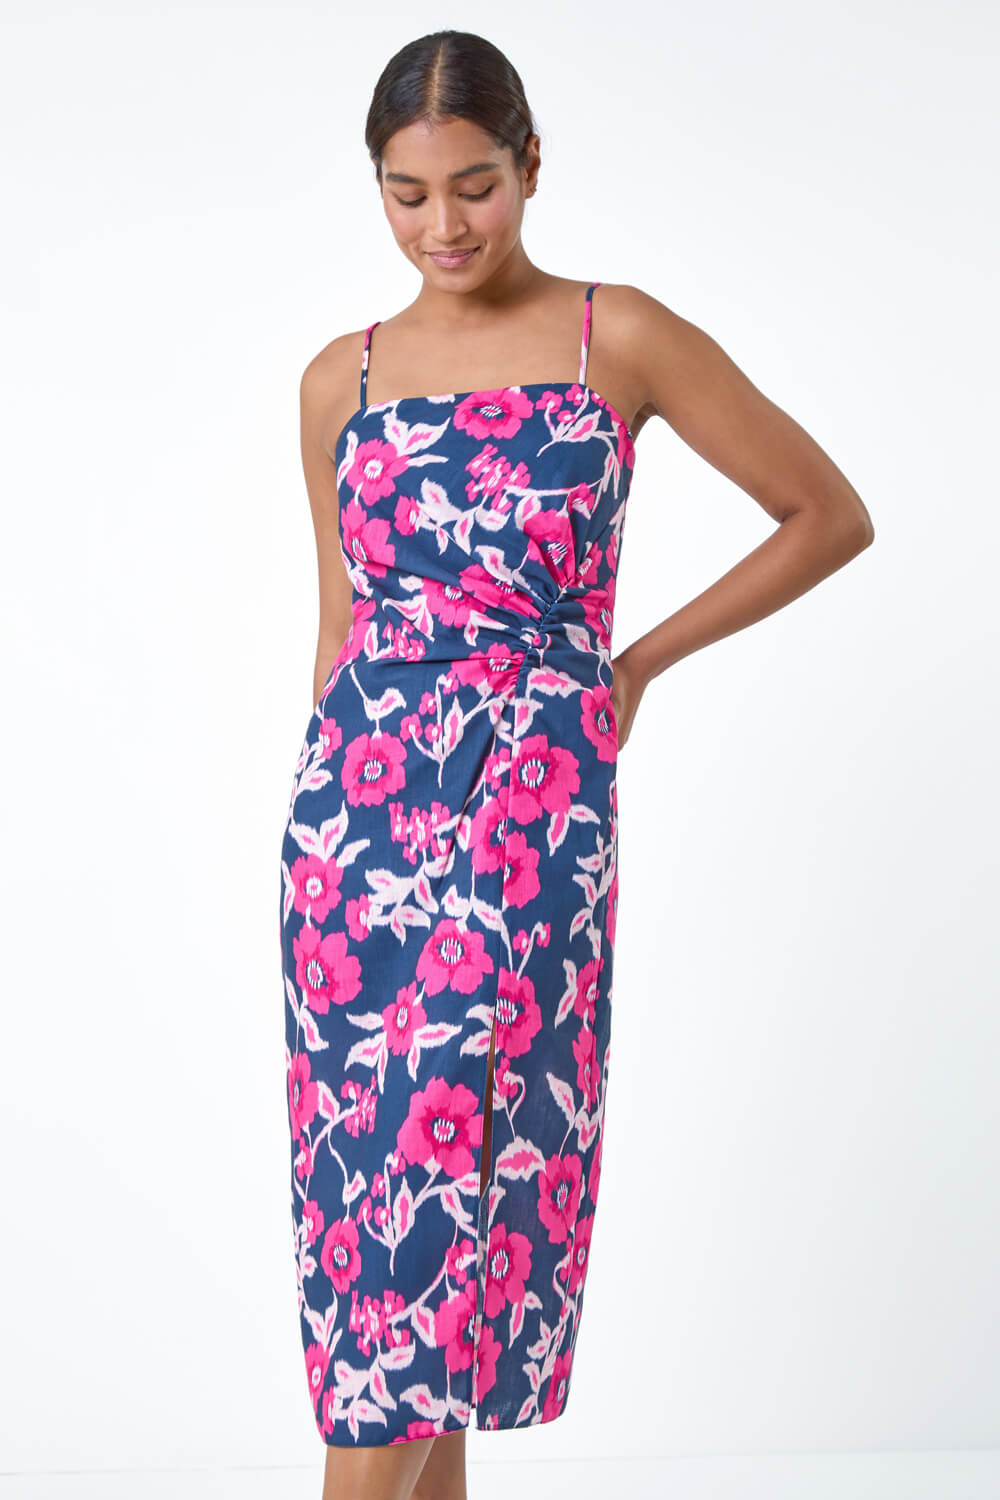 PINK Floral Linen Look Ruched Midi Dress, Image 2 of 5